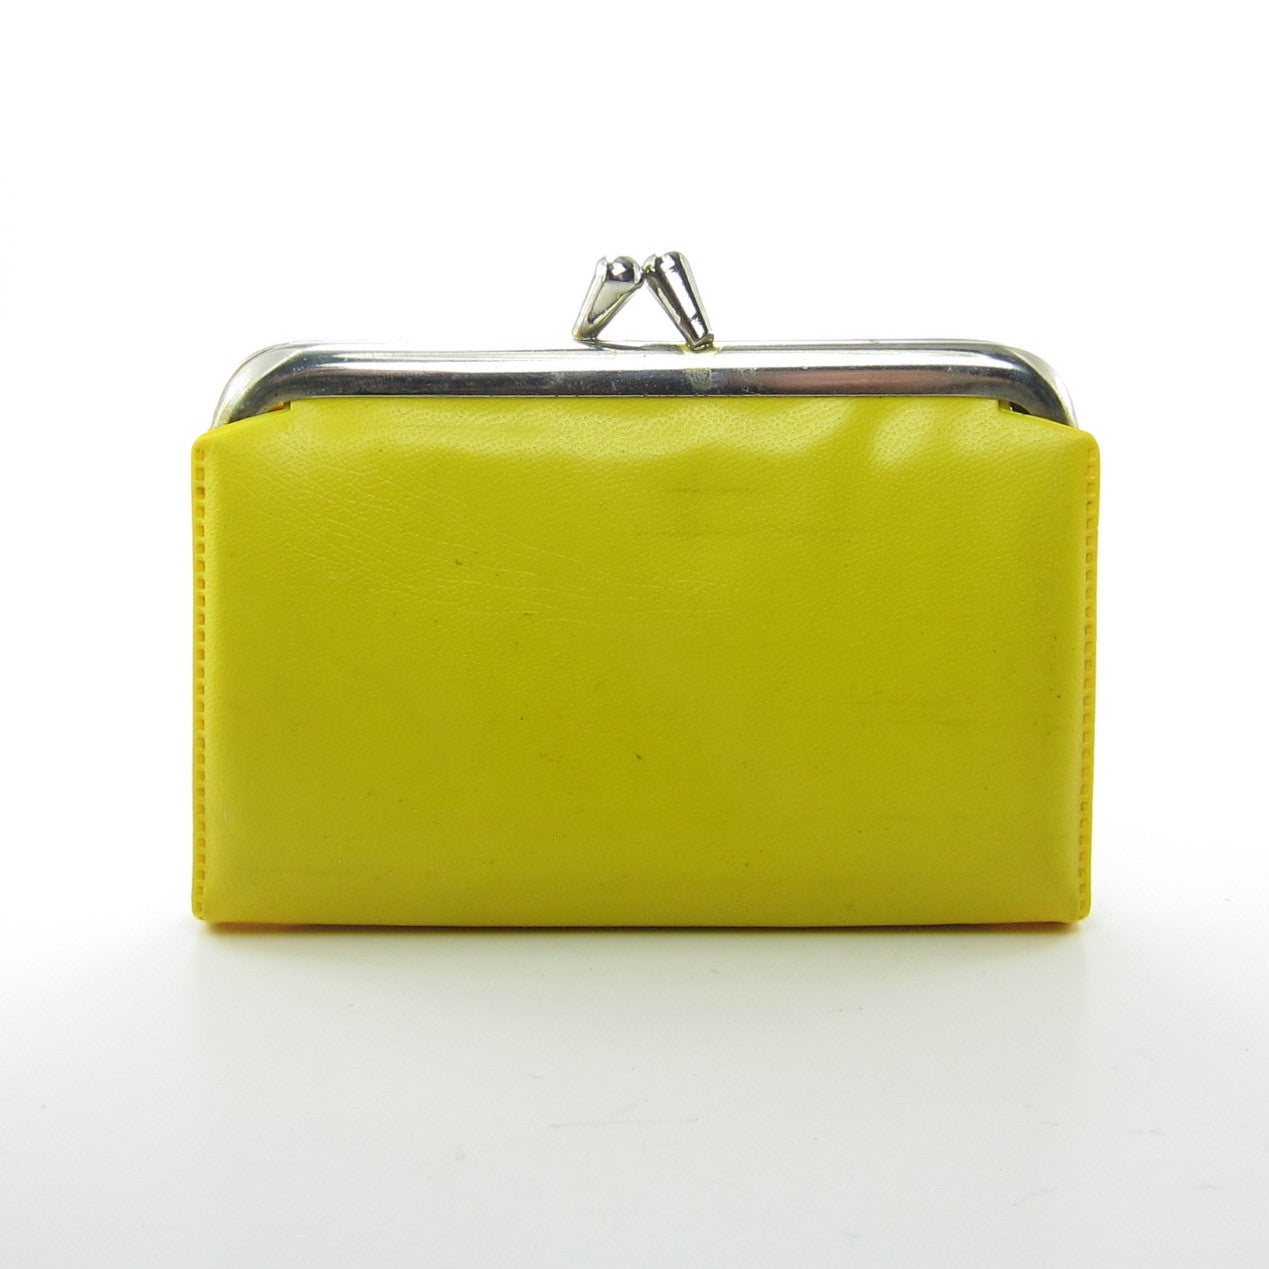 Charmkins Vintage Yellow Vinyl Kisslock Coin Purse with Brown Eyed Sus